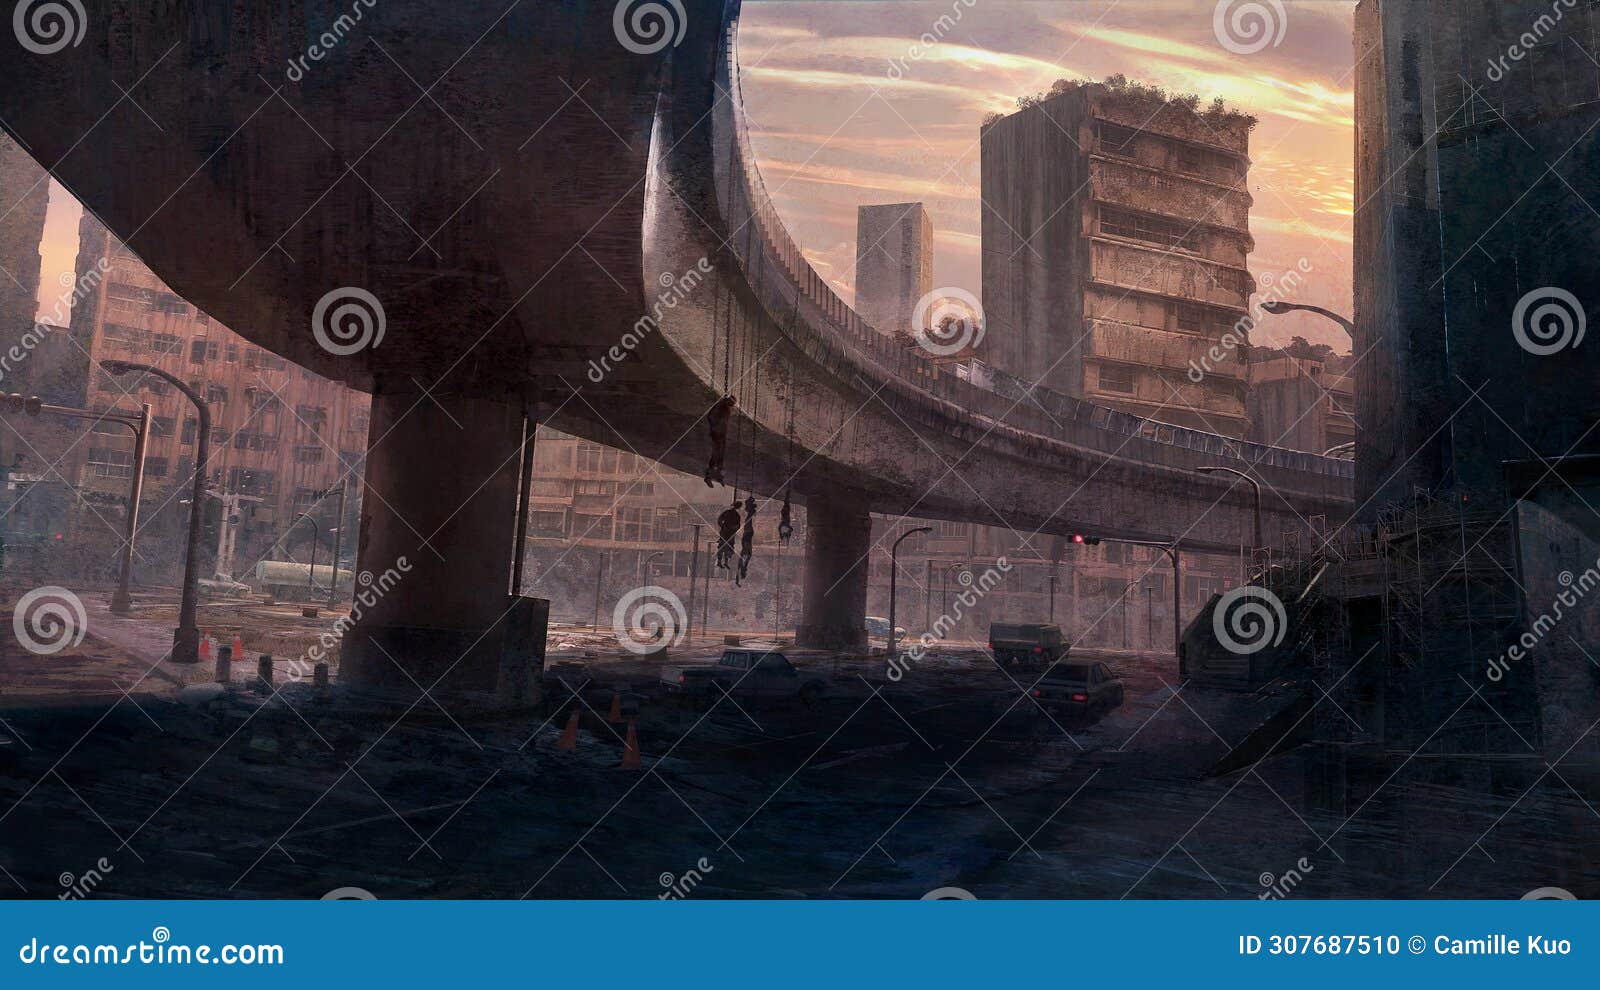 digital matte painting of environment scene in old city with cartel corpses under the bridge